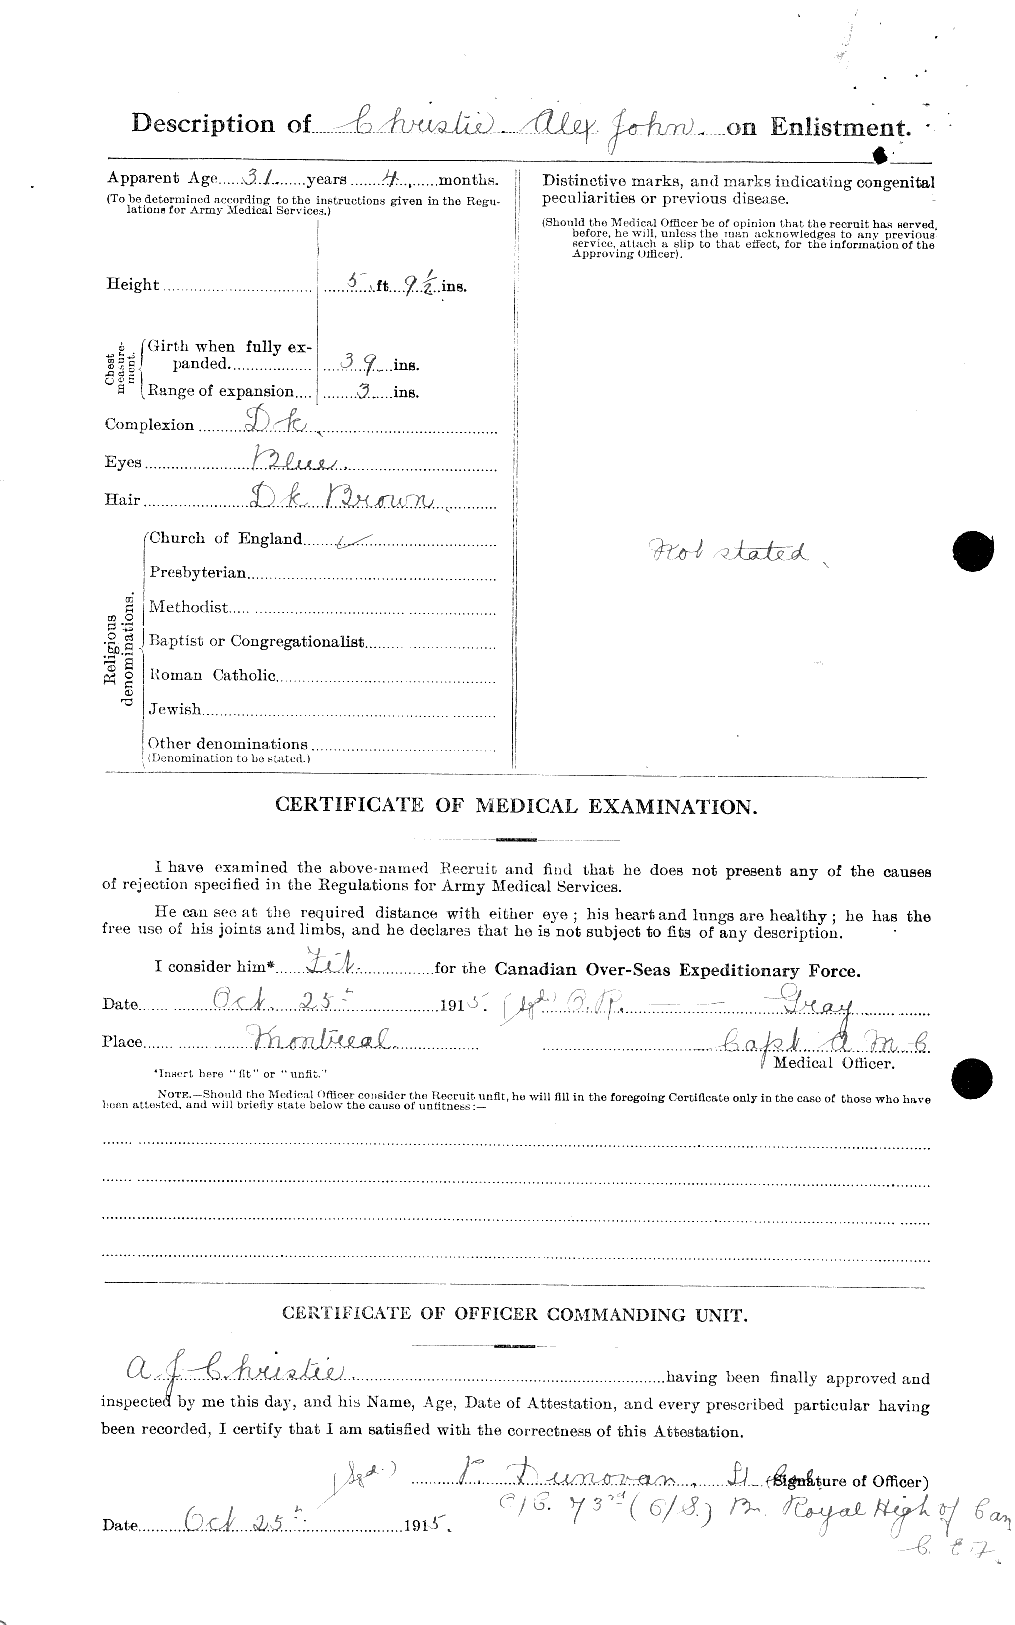 Personnel Records of the First World War - CEF 021864d